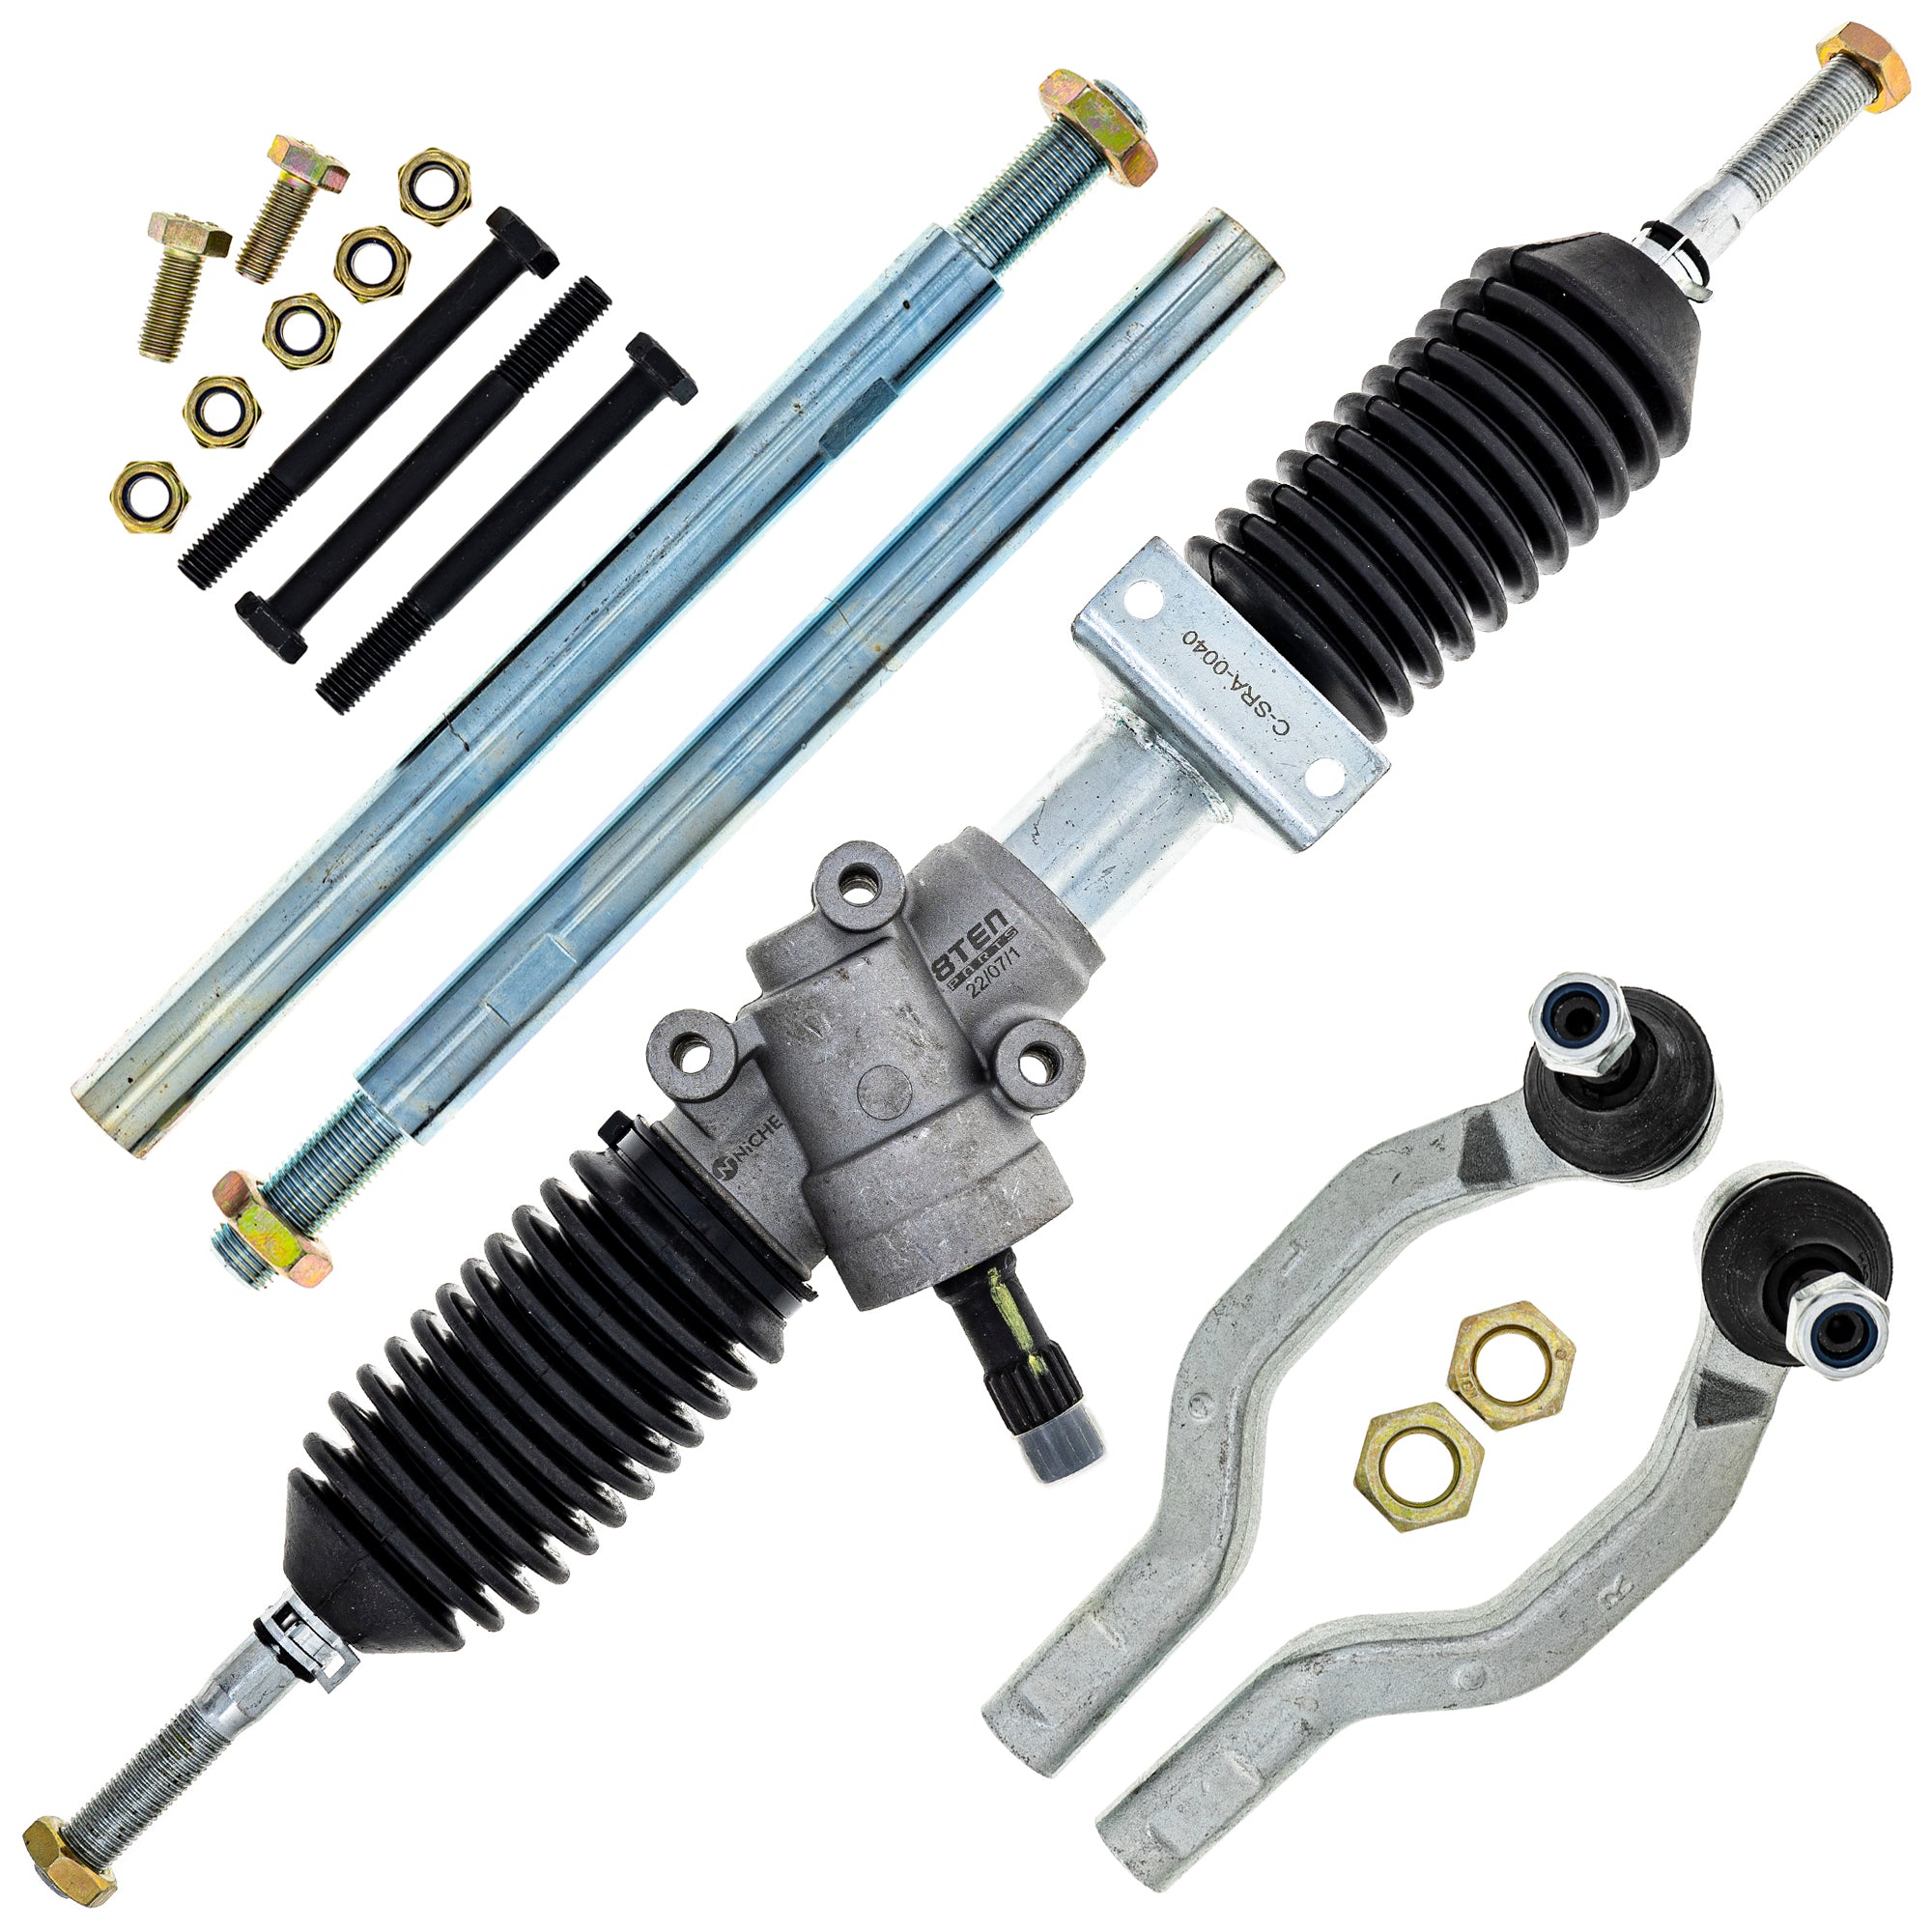 Steering Rack Assembly & Tie Rods Kit for zOTHER Polaris RZR NICHE MK1009502